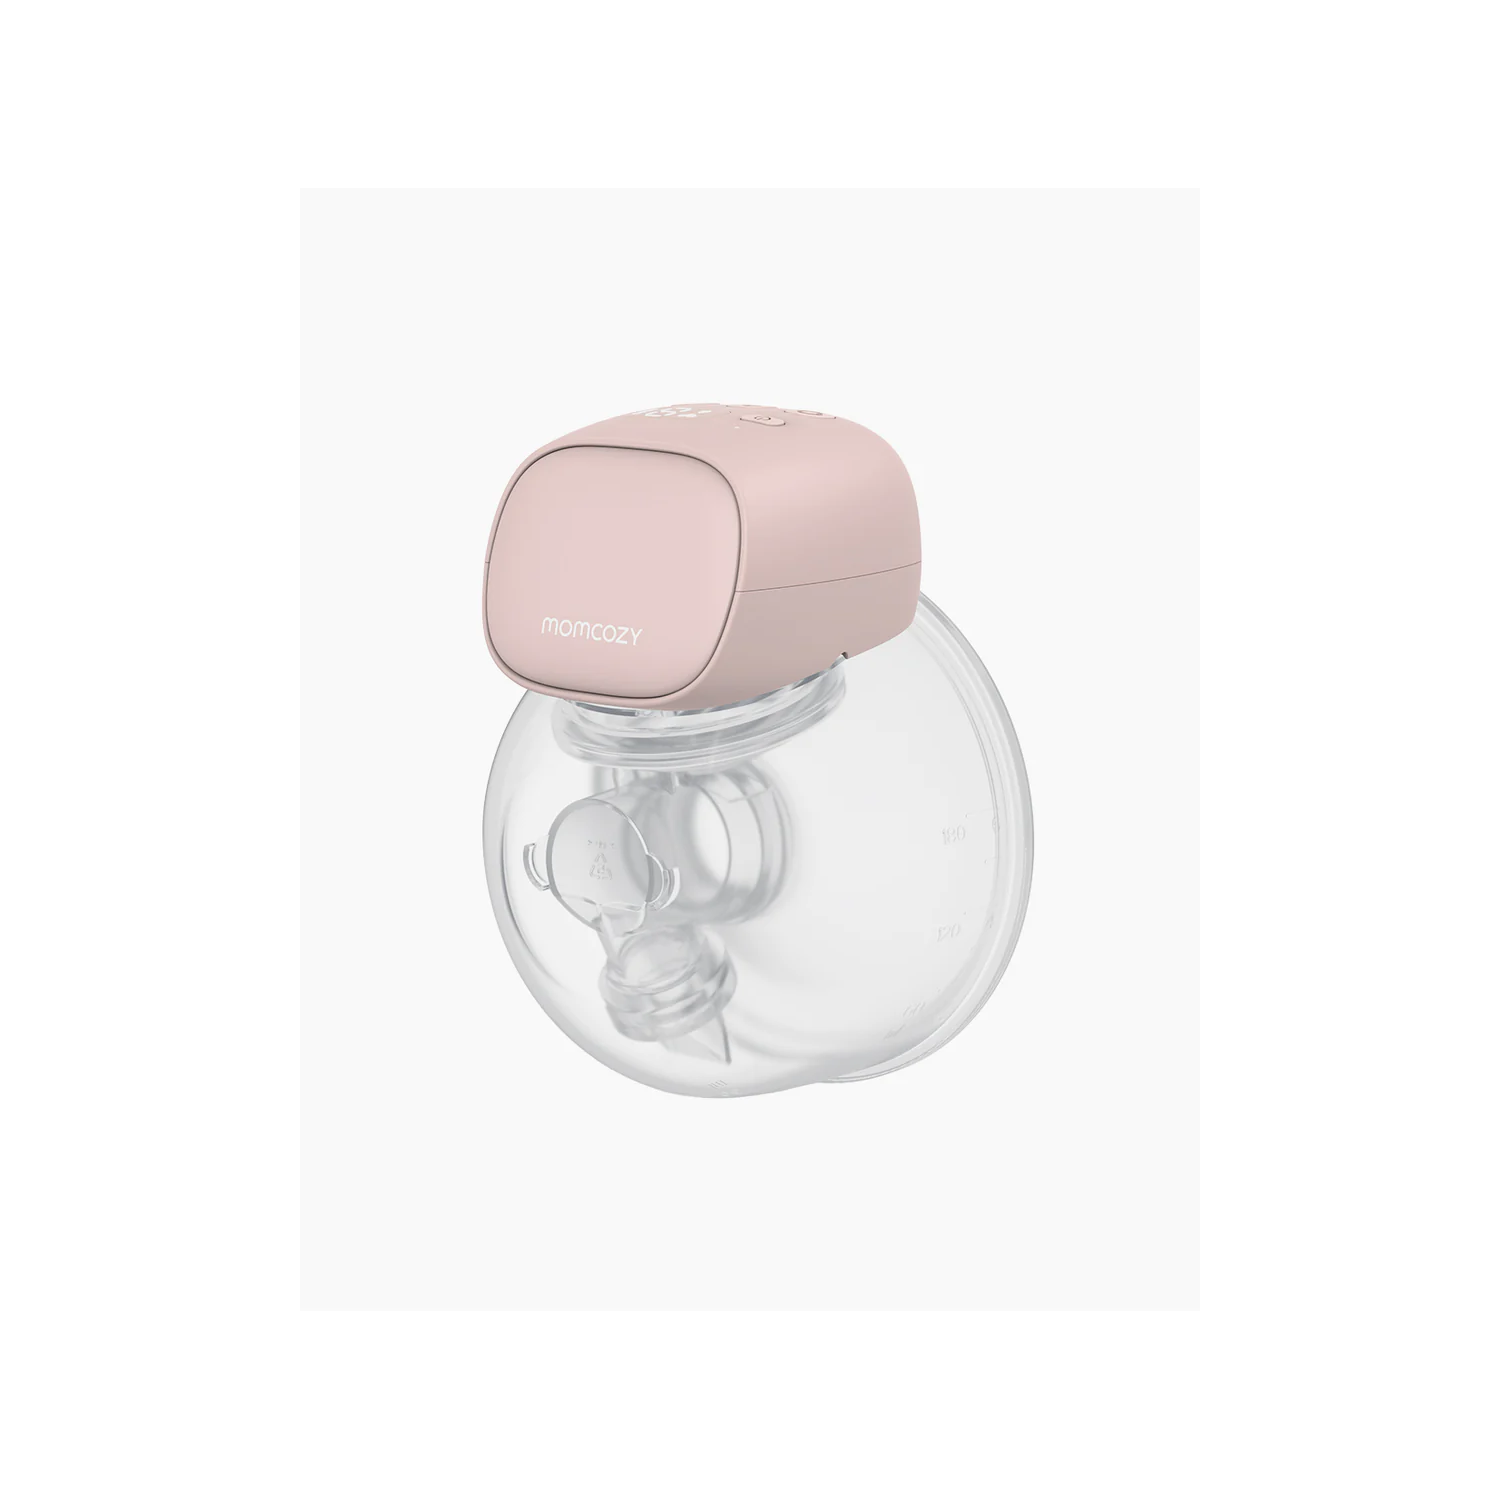 Momcozy S9 Pro-V Hands Free Electronic Wearable Breast Pump, 2Pack, Gray.